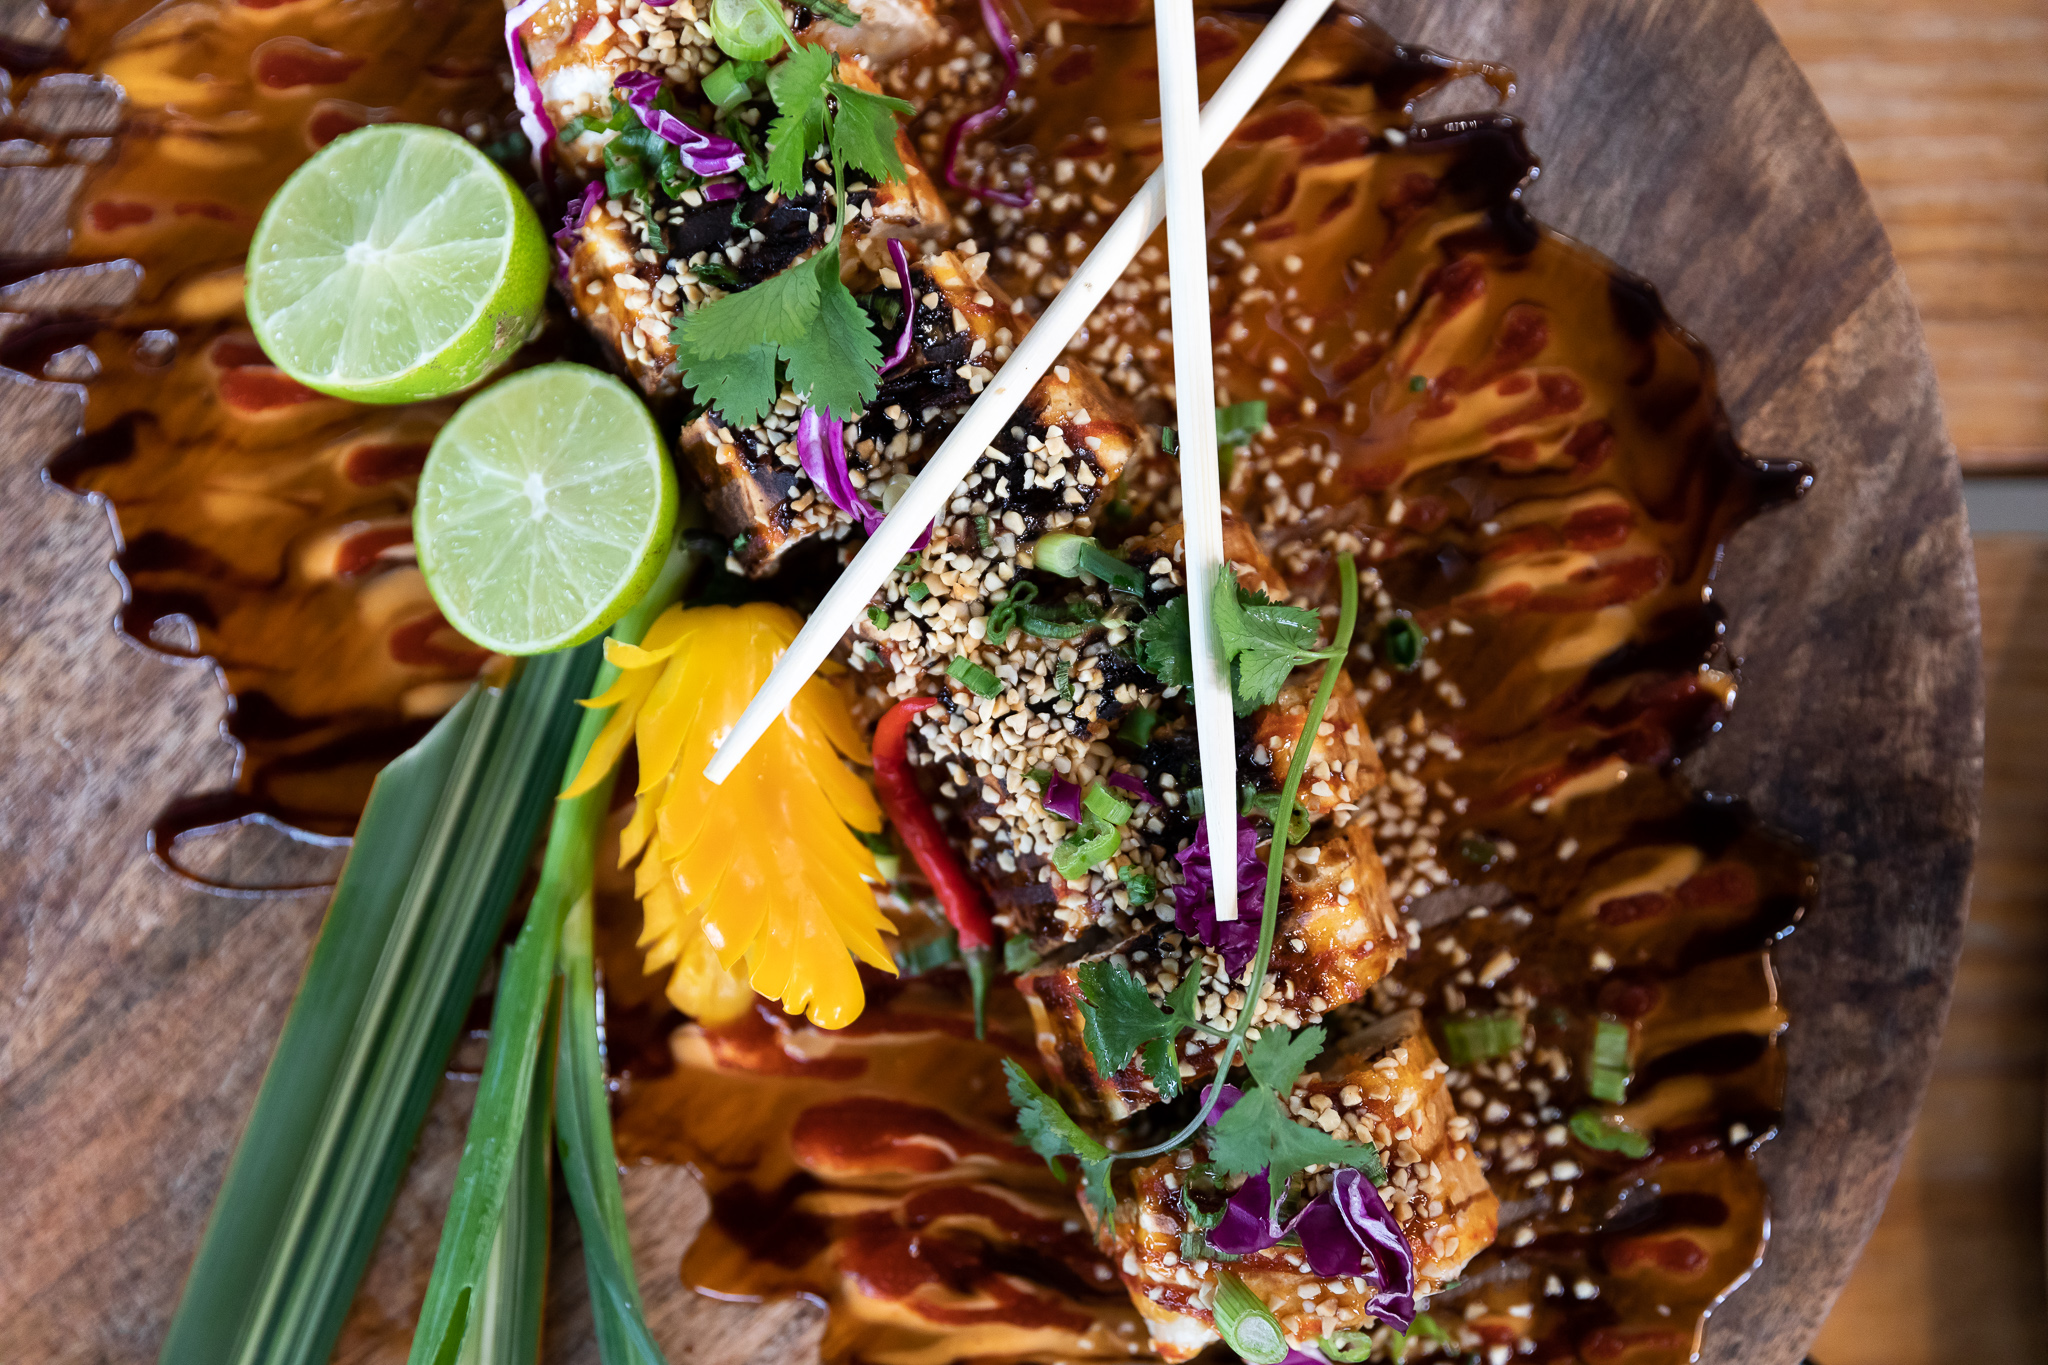 A sliced pad thai roll surrounded by herbs, sliced lime, chopsticks, and a pool of brown sauce.